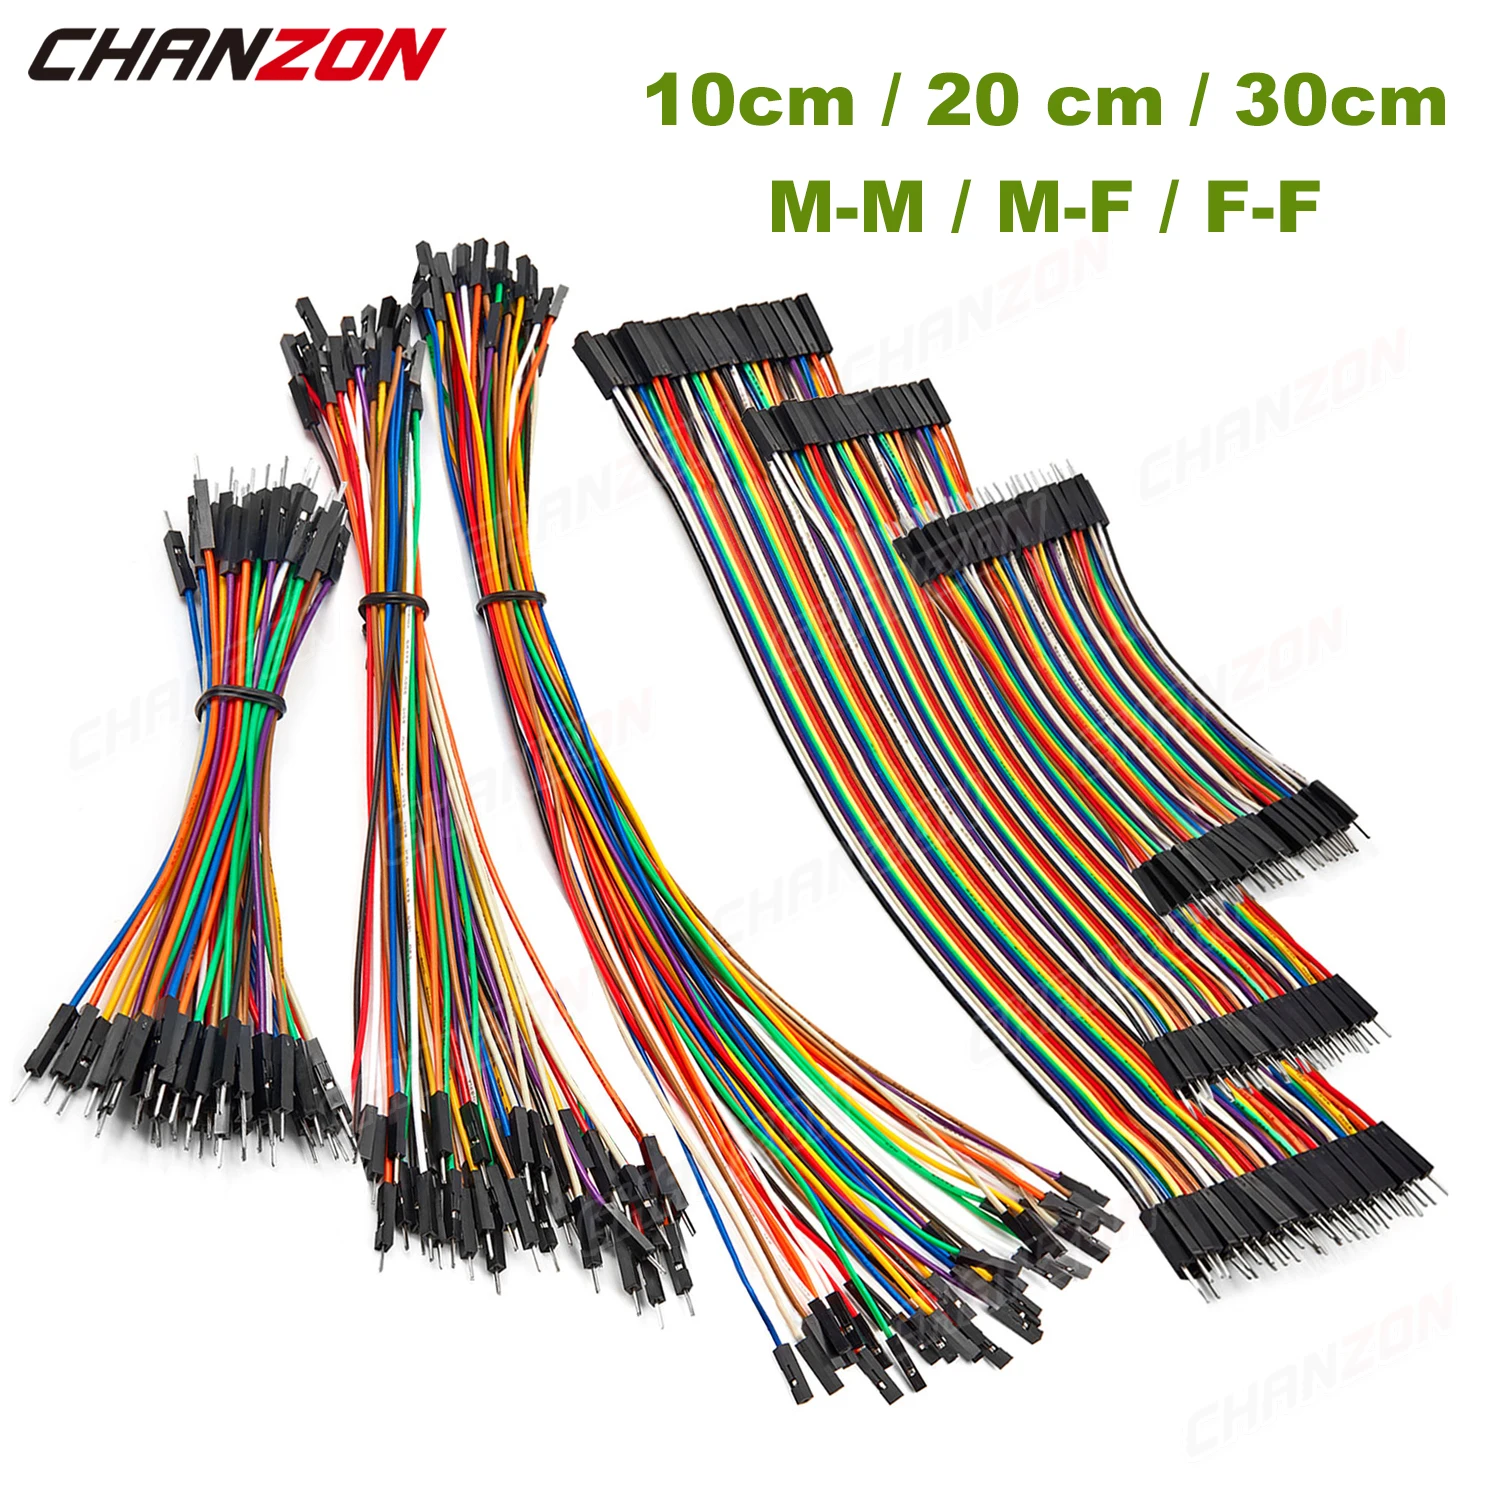 Dupont Cable Ribbon Jumper Wire Kit 10cm 20cm 30cm Male Female 24AWG Copper Line Set for DIY Arduino Breadboard PCB